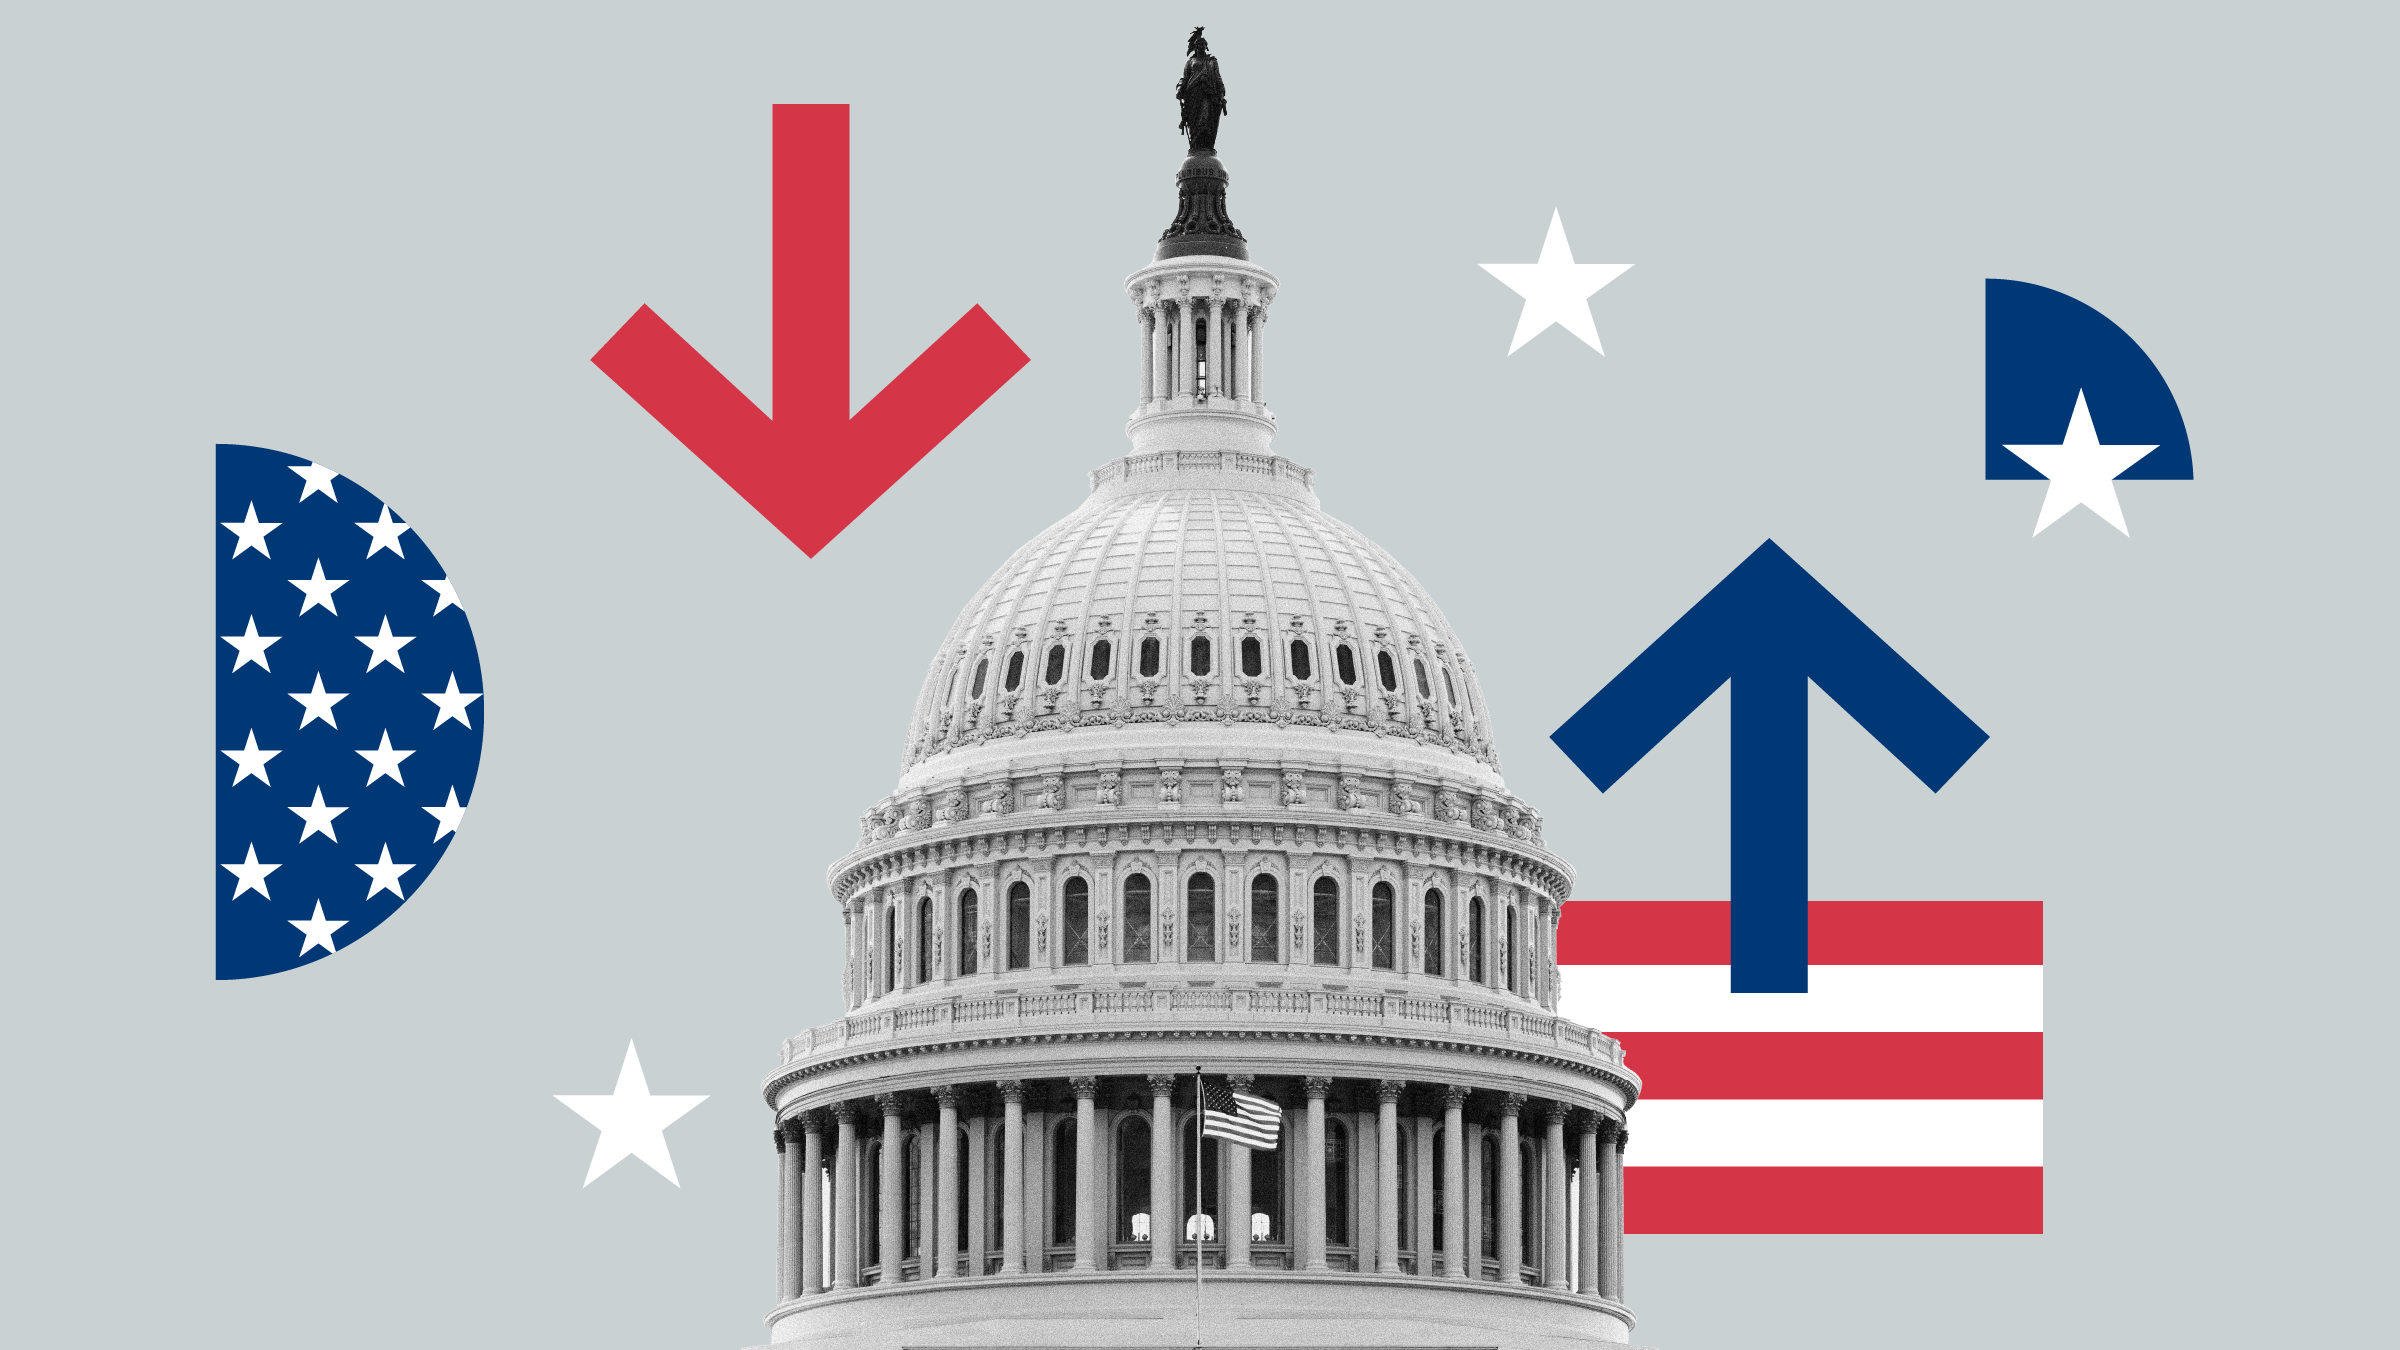 Photo collage illustration: Capitol building peak with American flag elements and arrows depicting election and market uncertainty.